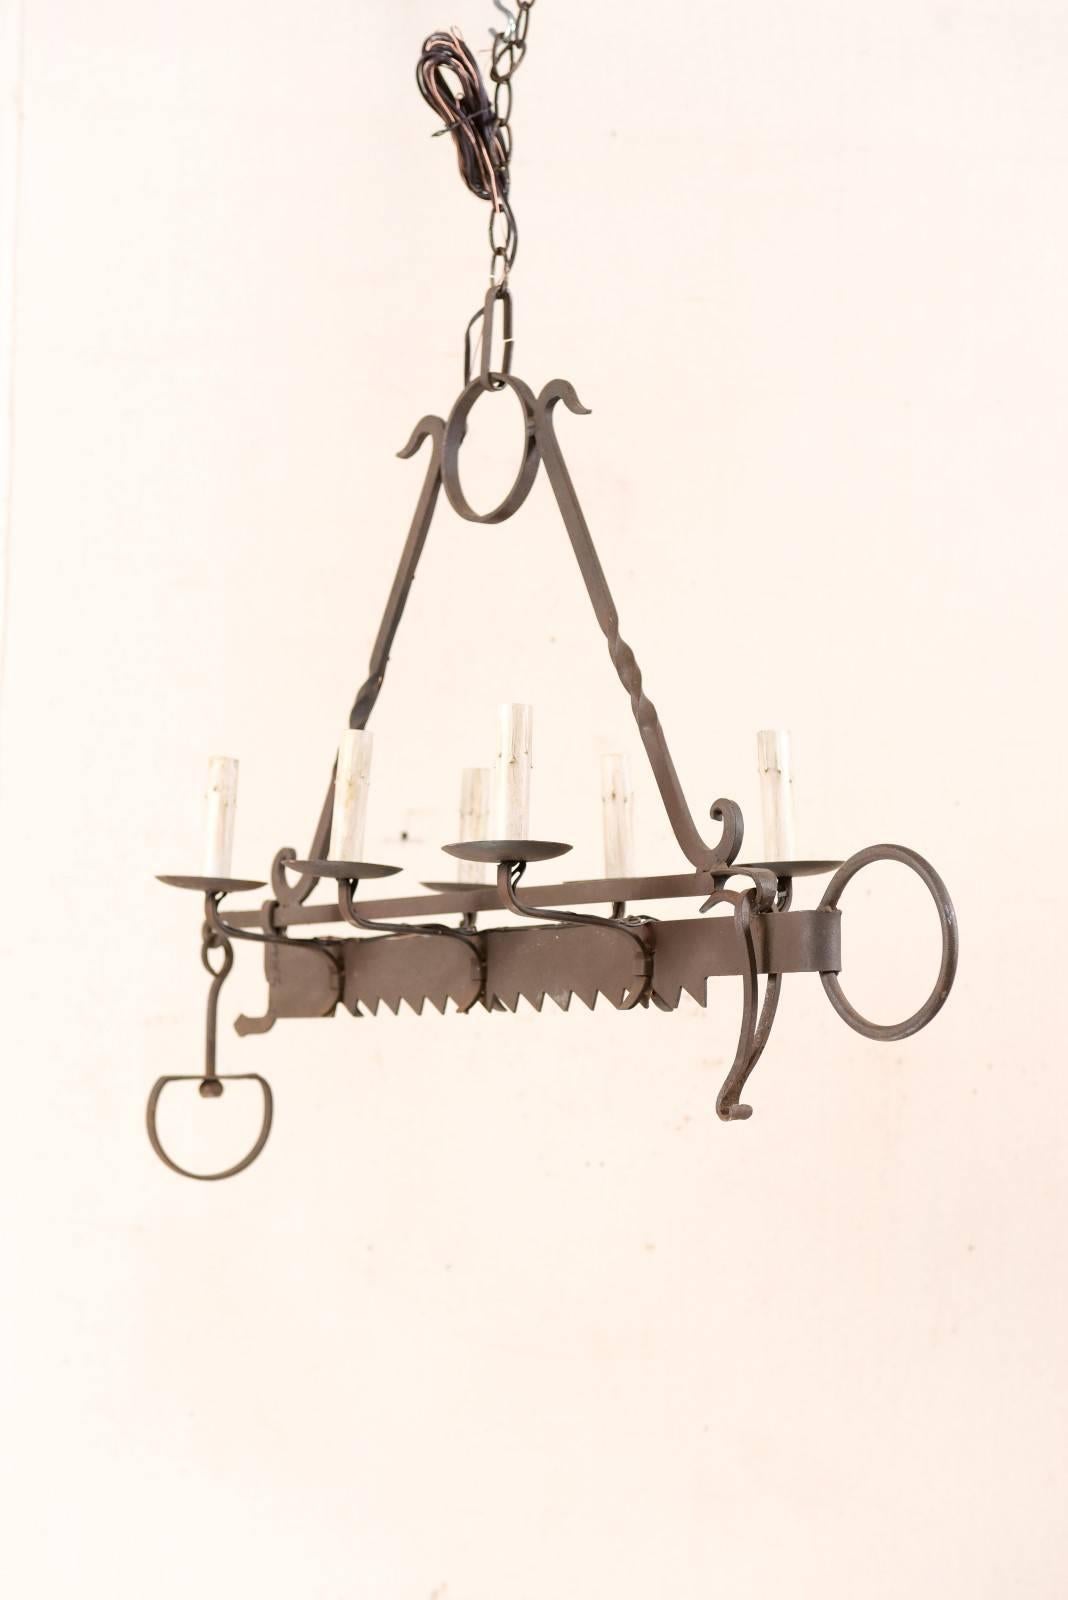 A French midcentury, six-light forged-iron chandelier made from a 19th century spit-jack. A spit-jack is a type of rotisserie that was once common in fireplaces. This chandelier has six arms, three lifting up and out along each long side of the